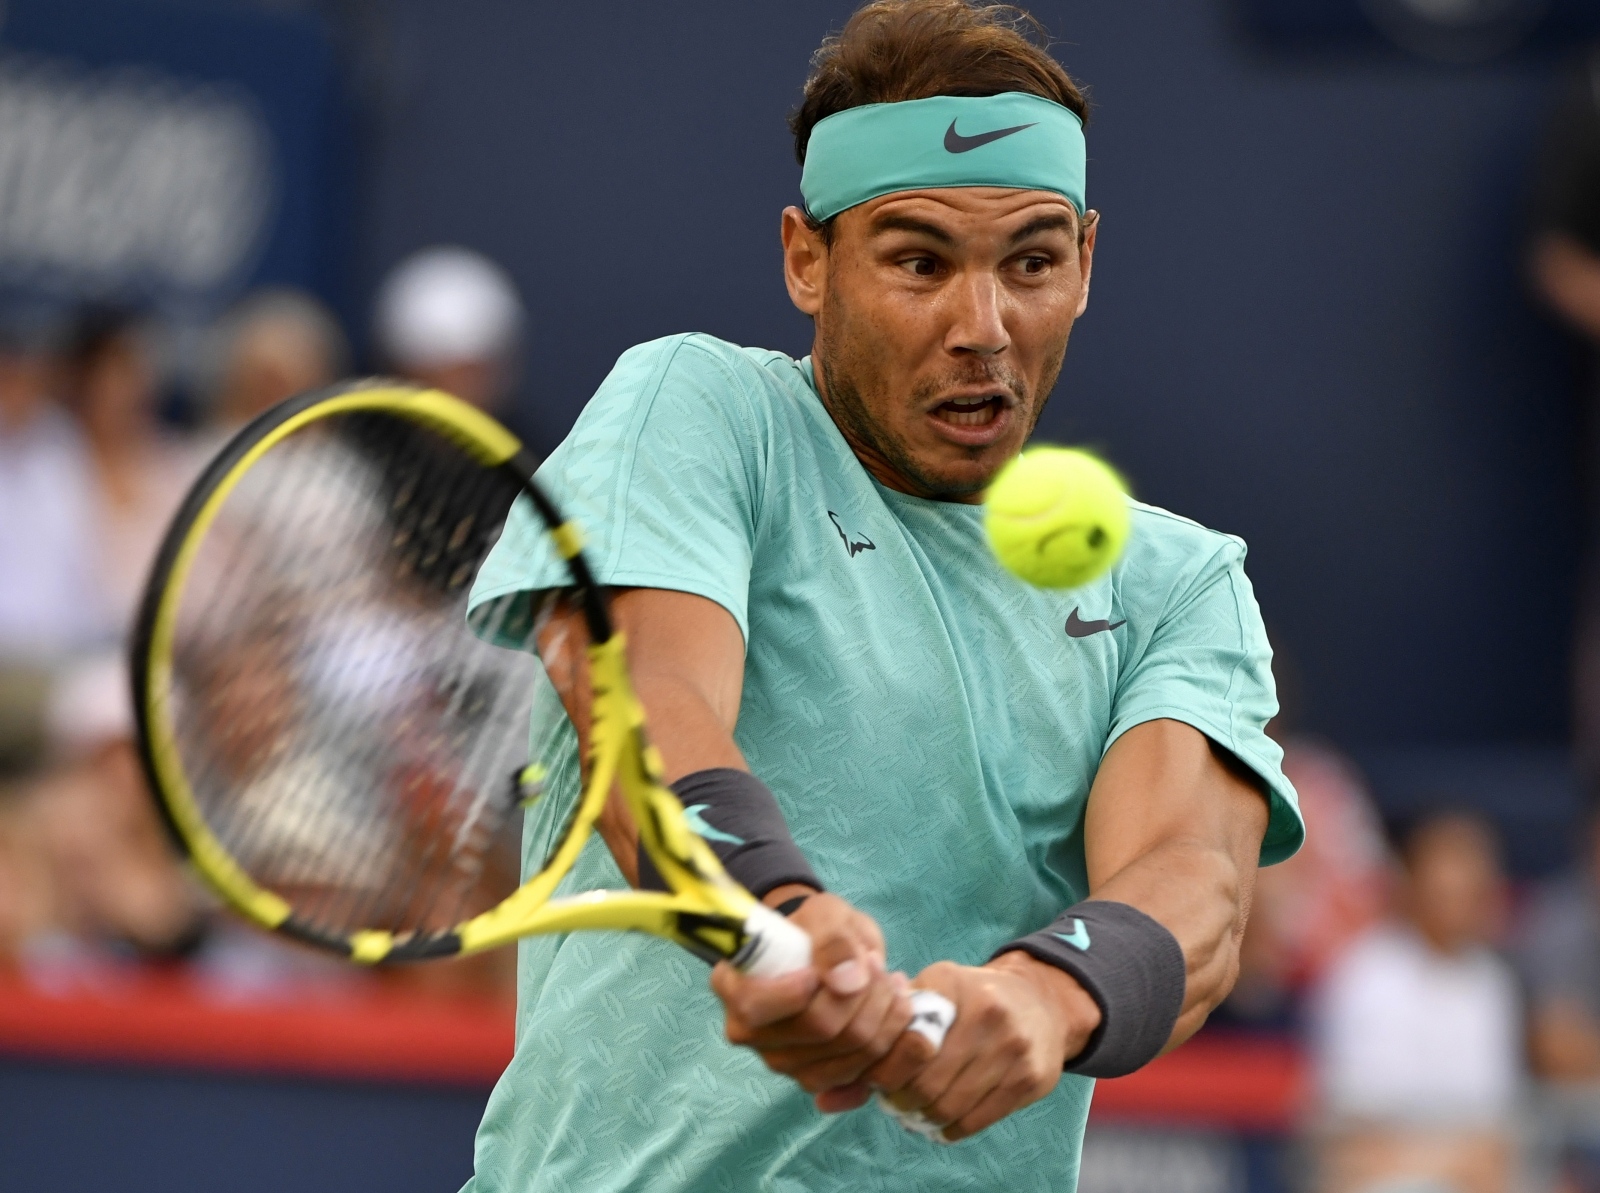 Tennis: Rogers Cup Aug 9, 2019; Montreal, Quebec, Canada; Rafael Nadal of Spain hits a shot against Fabio Fognini of Italy (not pictured) during the Rogers Cup tennis tournament at Stade IGA. Mandatory Credit: Eric Bolte-USA TODAY Sports Eric Bolte